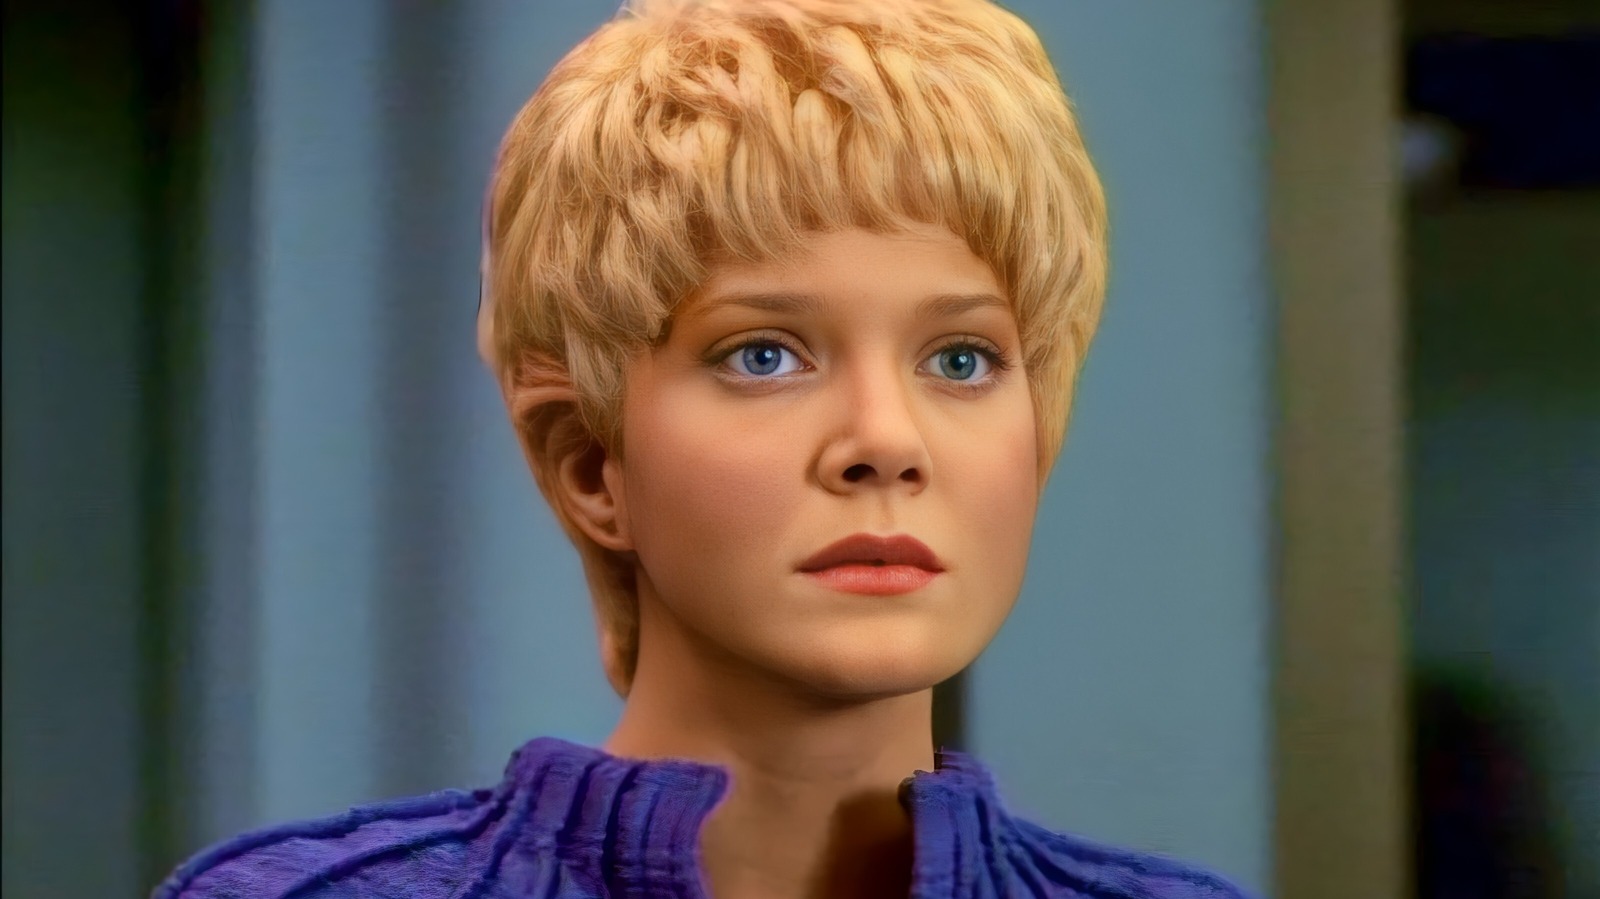 what happened to kes from voyager